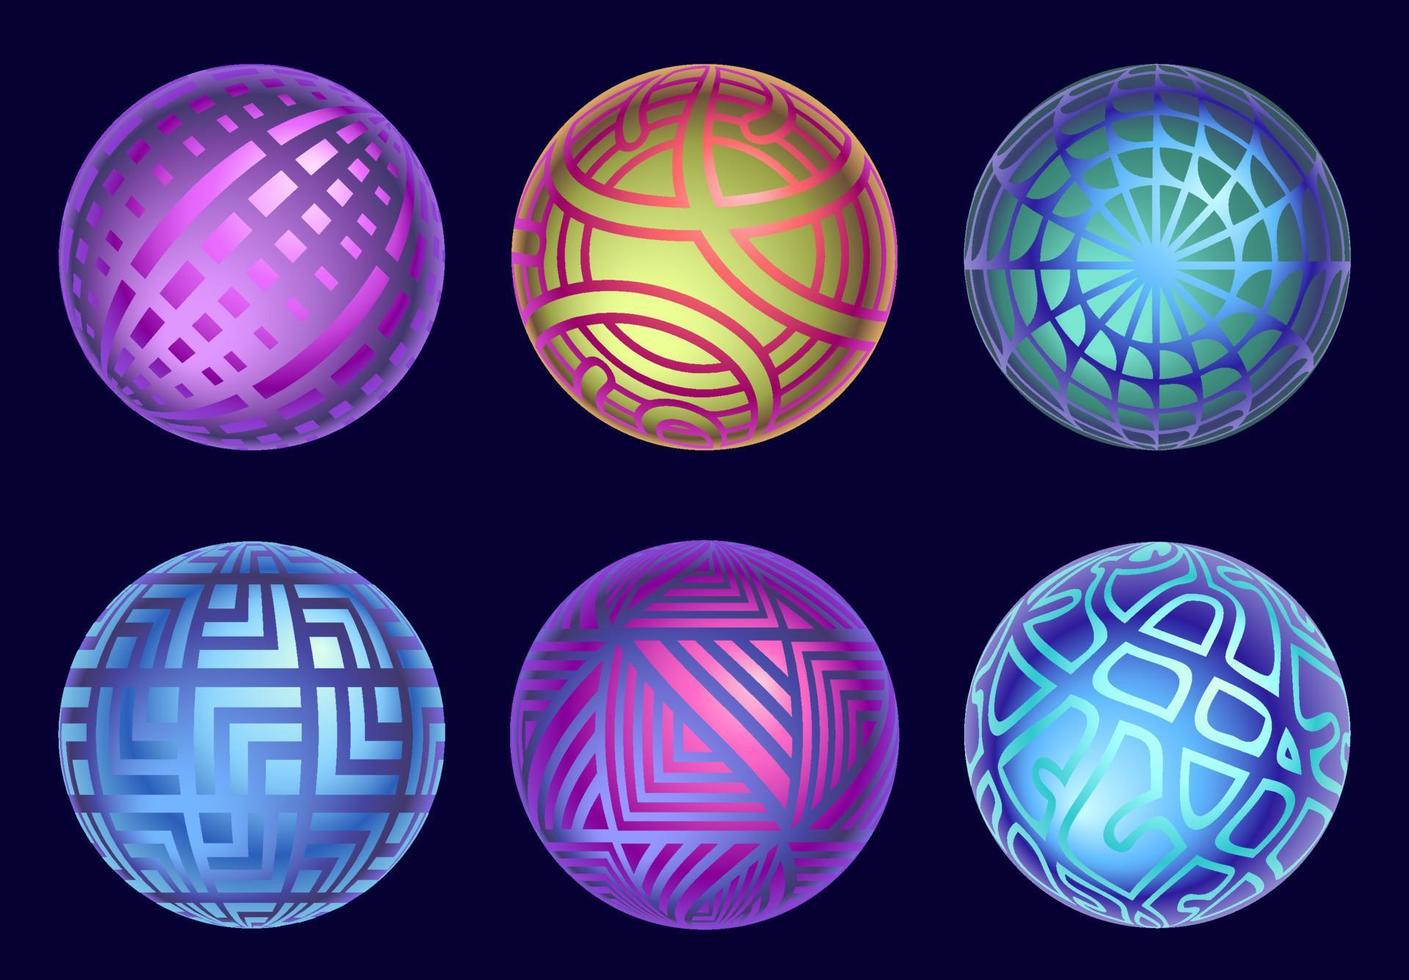 Magic sphere collection. Set of mistic vector balls isolated on dark background. Abstract mysterious magic spheres in yellow, blue, purple colors.